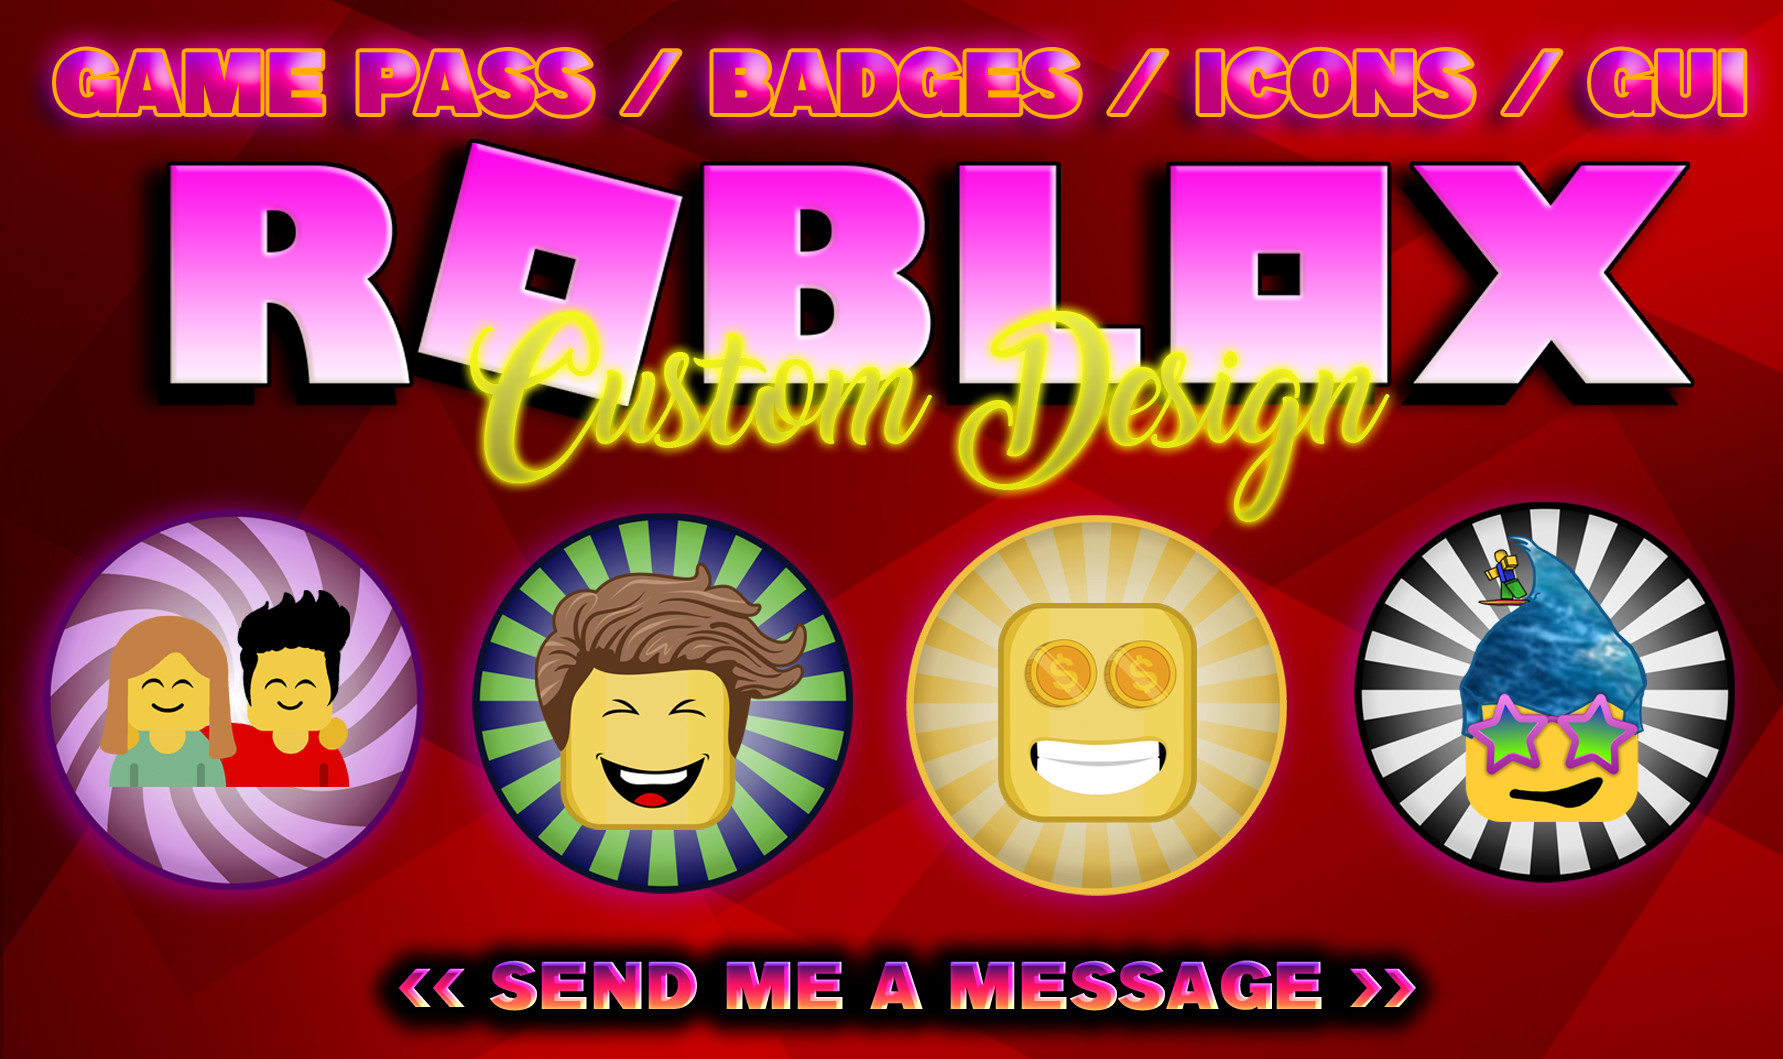 Making roblox badge and gamepass icons for your experience by